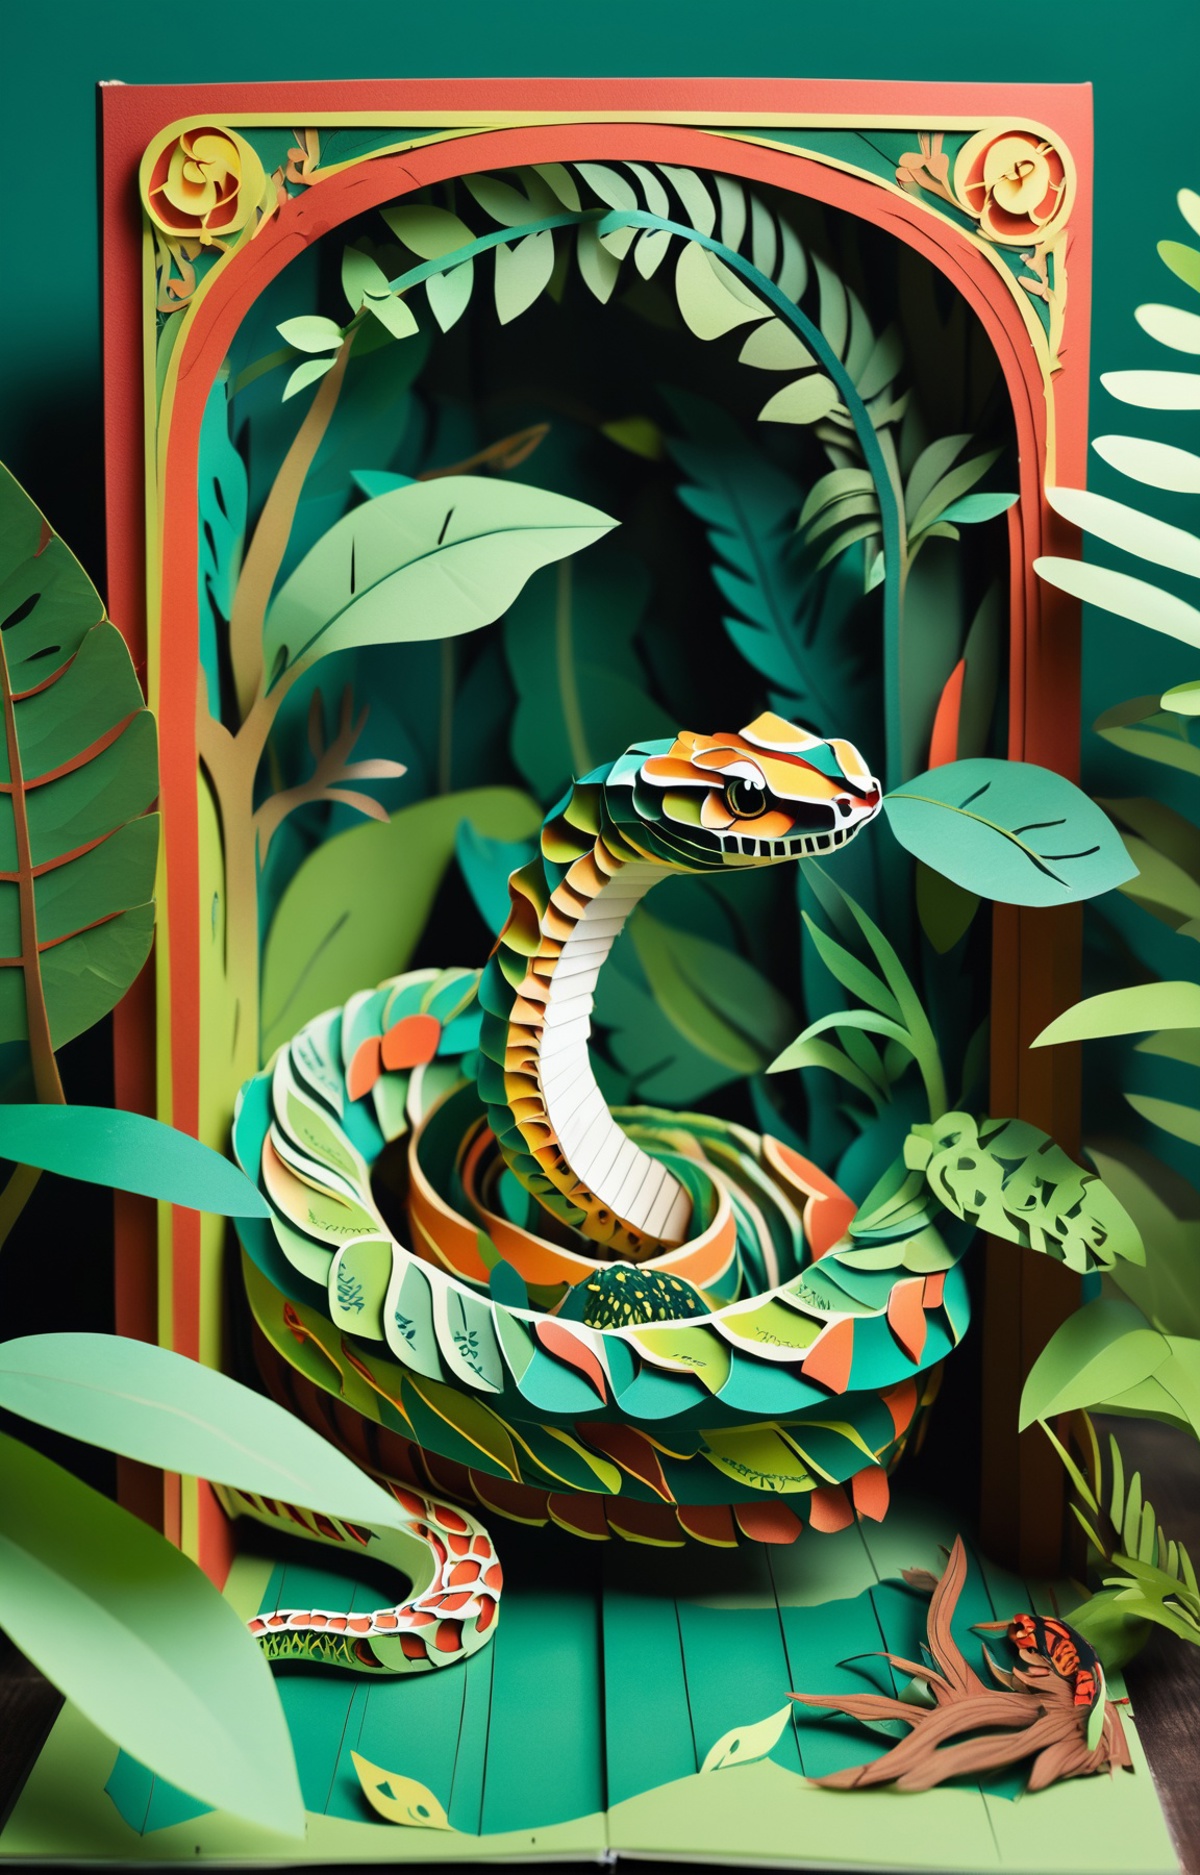 A green and orange snake made of paper and leaves.